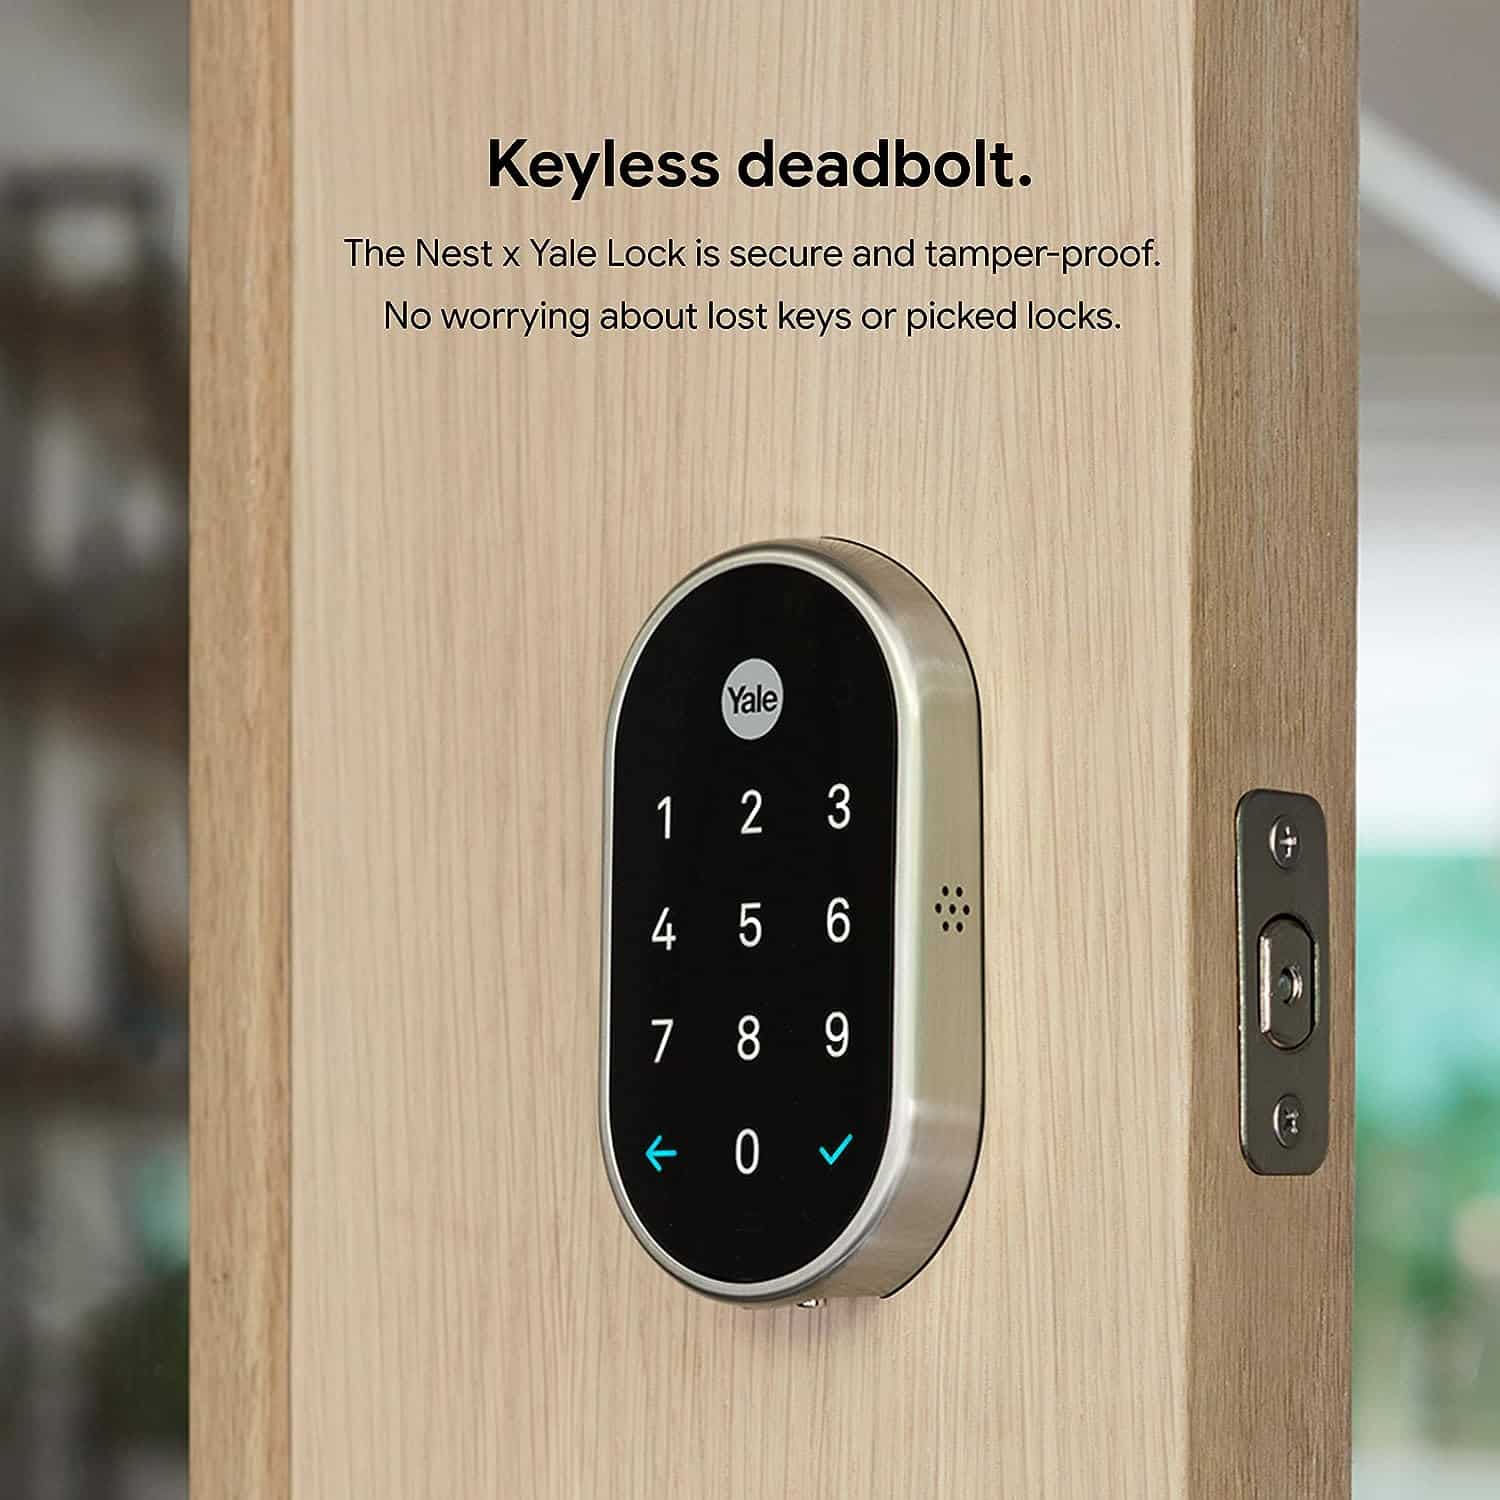 Google Nest x Yale Lock Review - The Ultimate Tamper-Proof Smart Lock for Keyless Entry